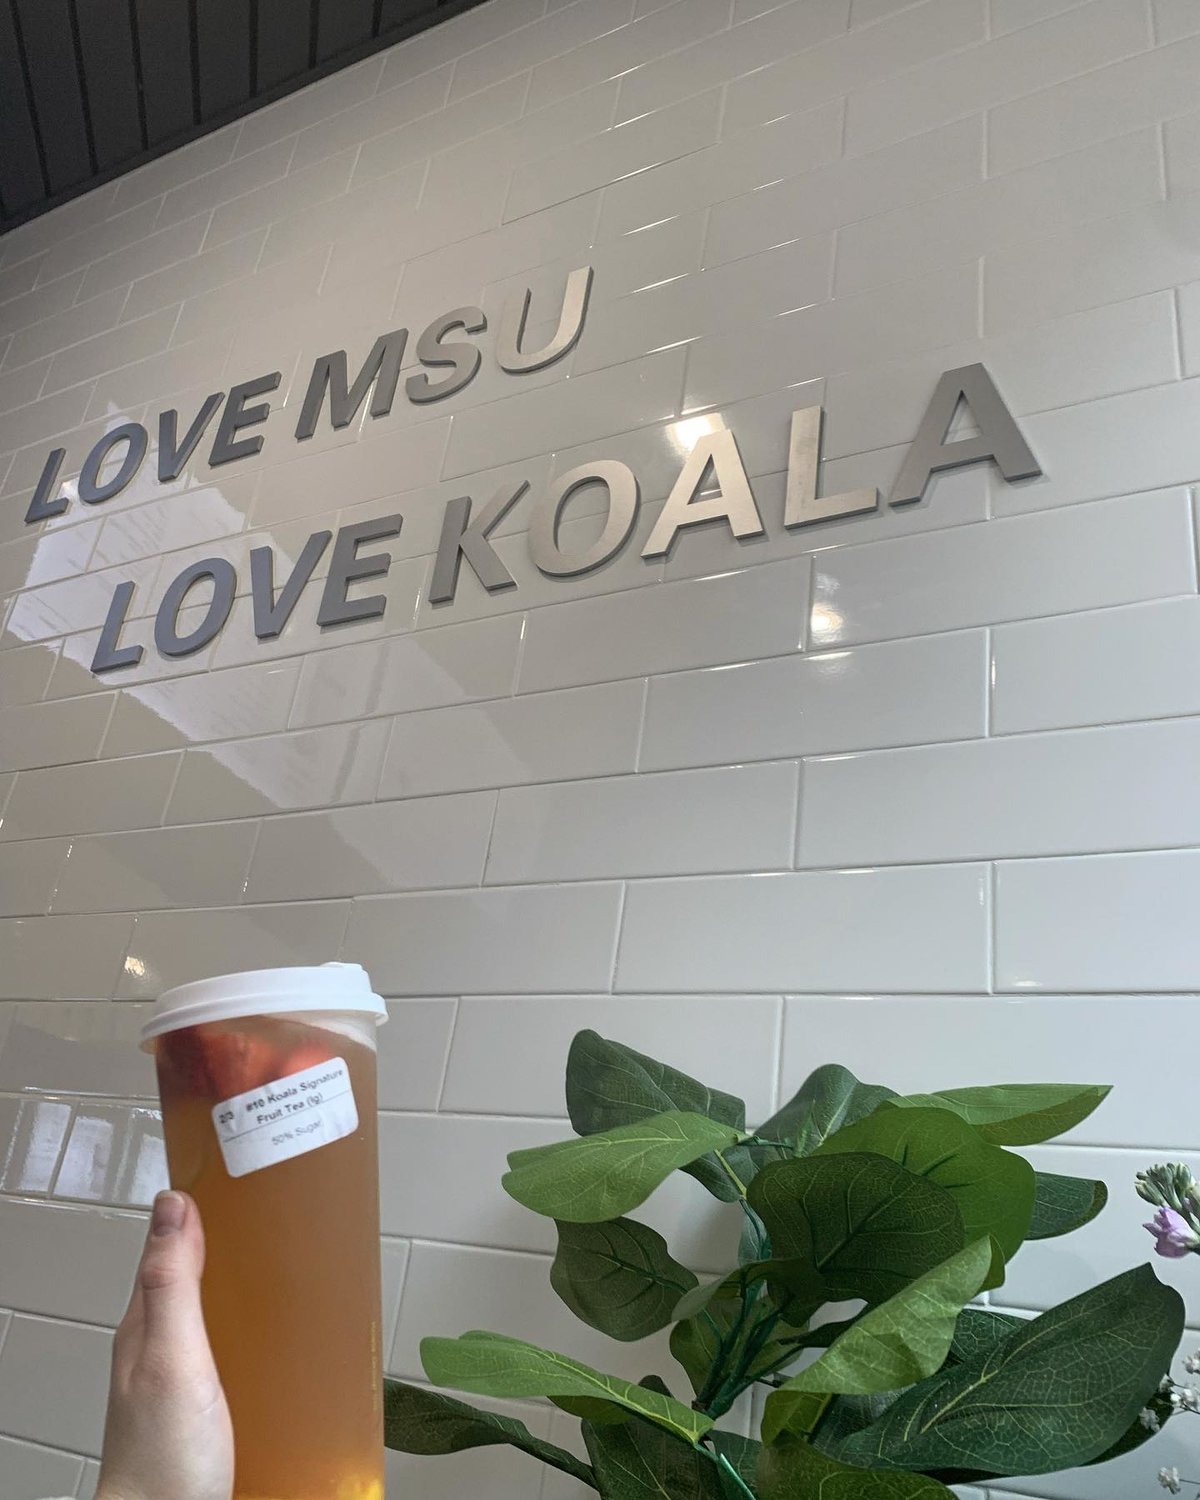 Koala Tea & Coffee opened up in March and serves a variety of teas and sweets.